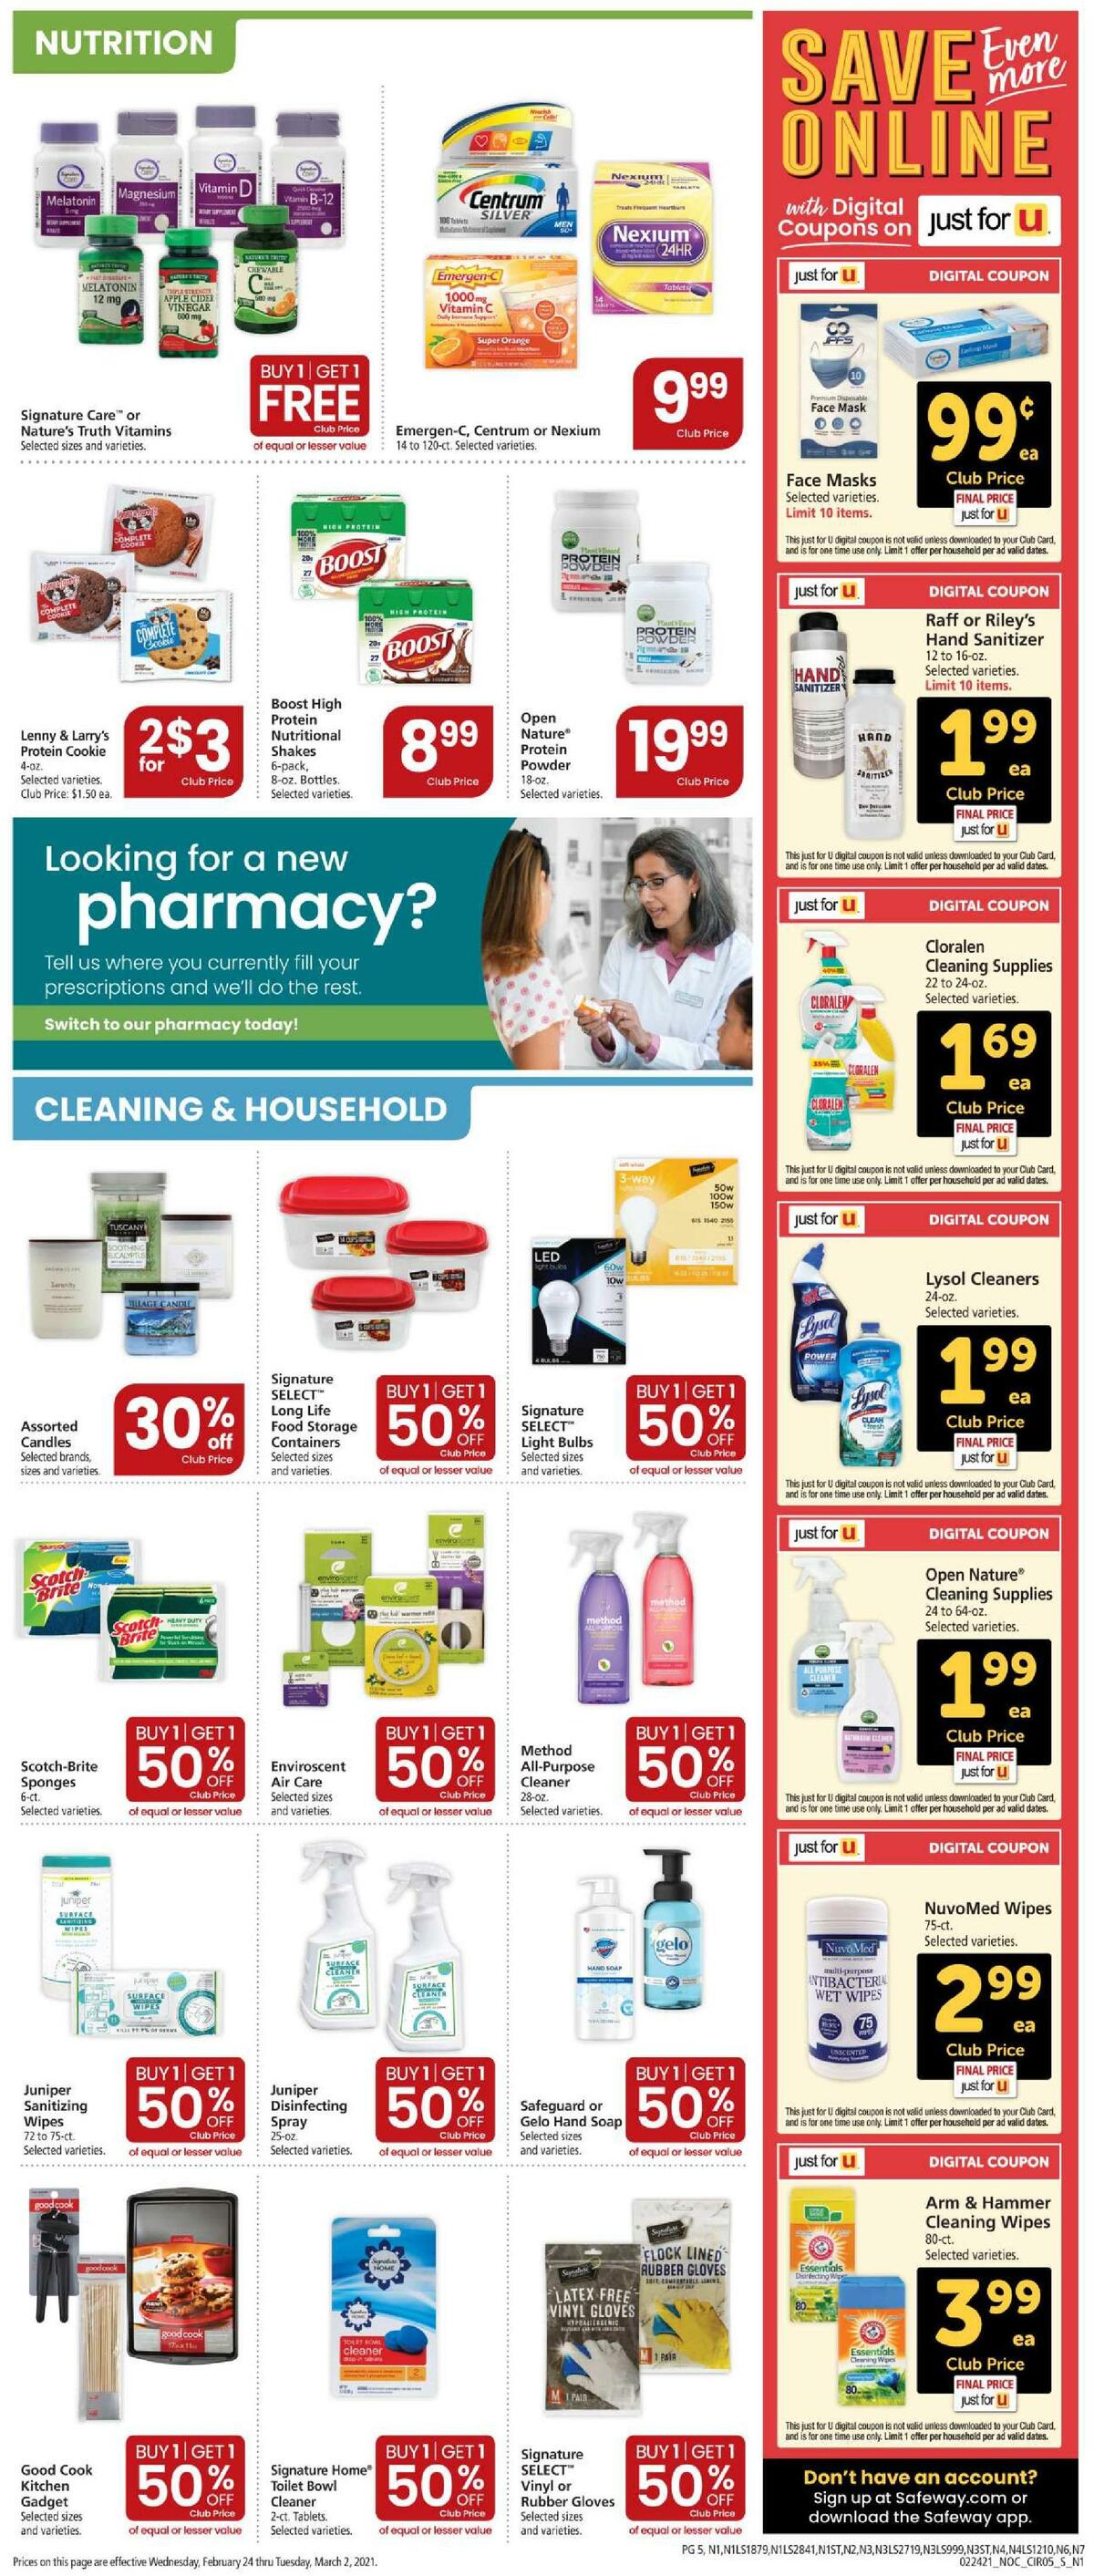 Safeway Weekly Ad from February 24